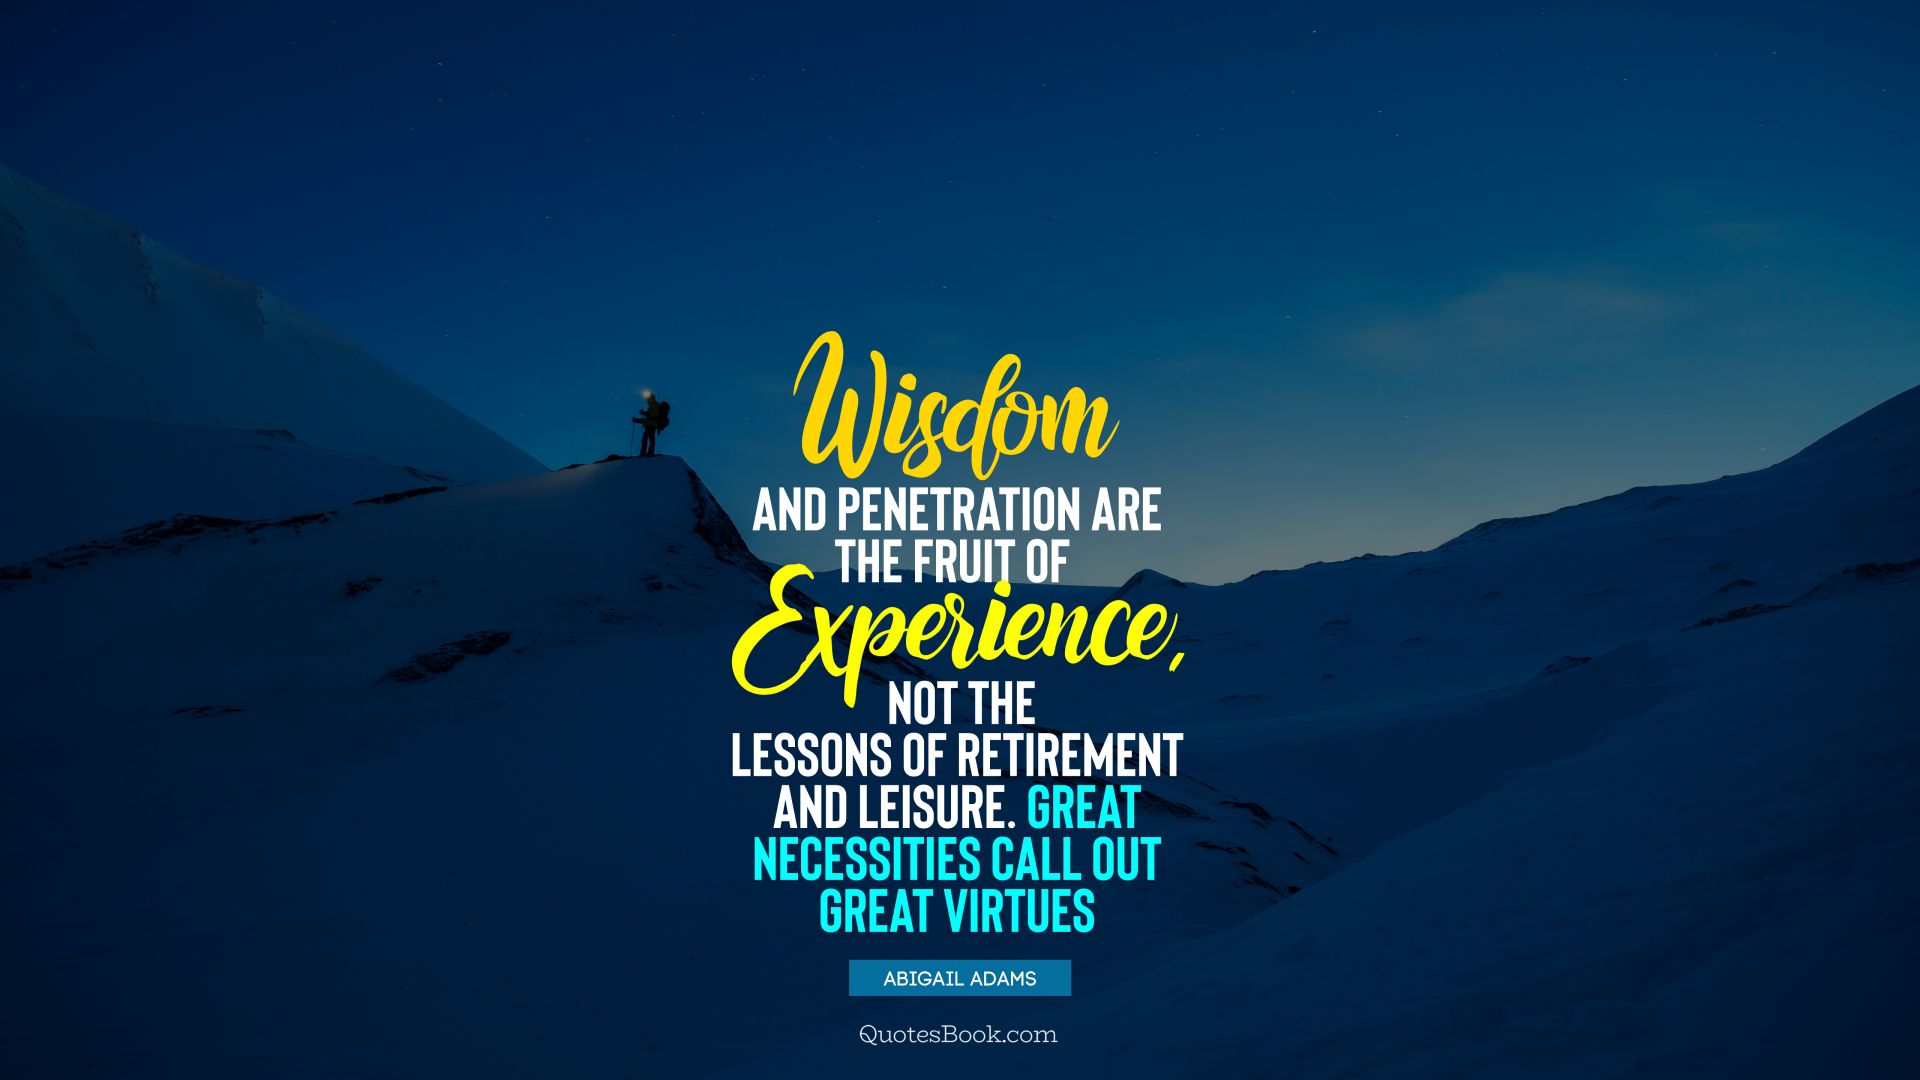 Wisdom and penetration are the fruit of experience, not the lessons of retirement and leisure. Great necessities call out great virtues. - Quote by Abigail Adams